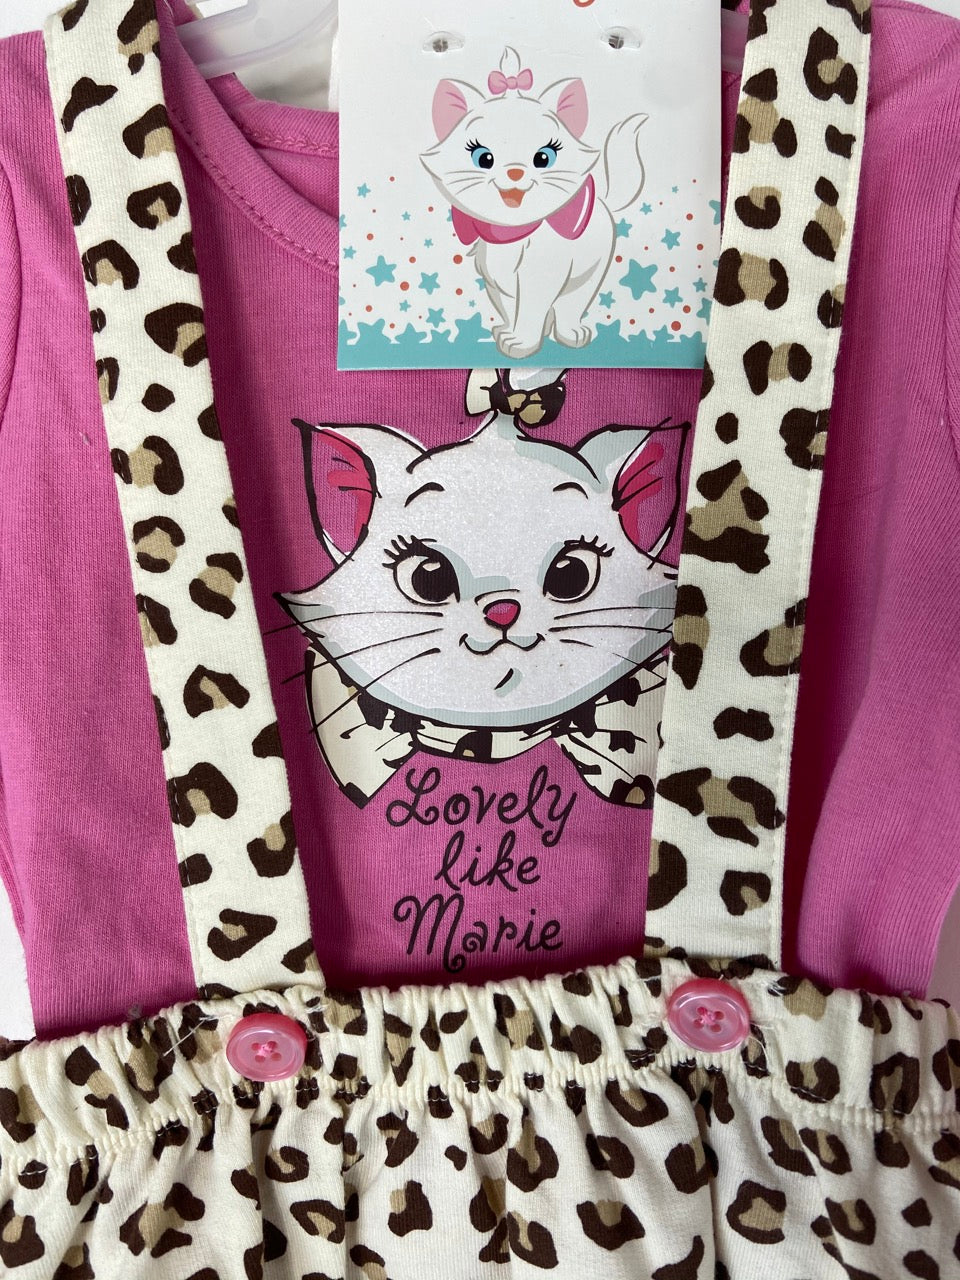 Aristocats 3 Piece Outfit- NWT - 12 Months